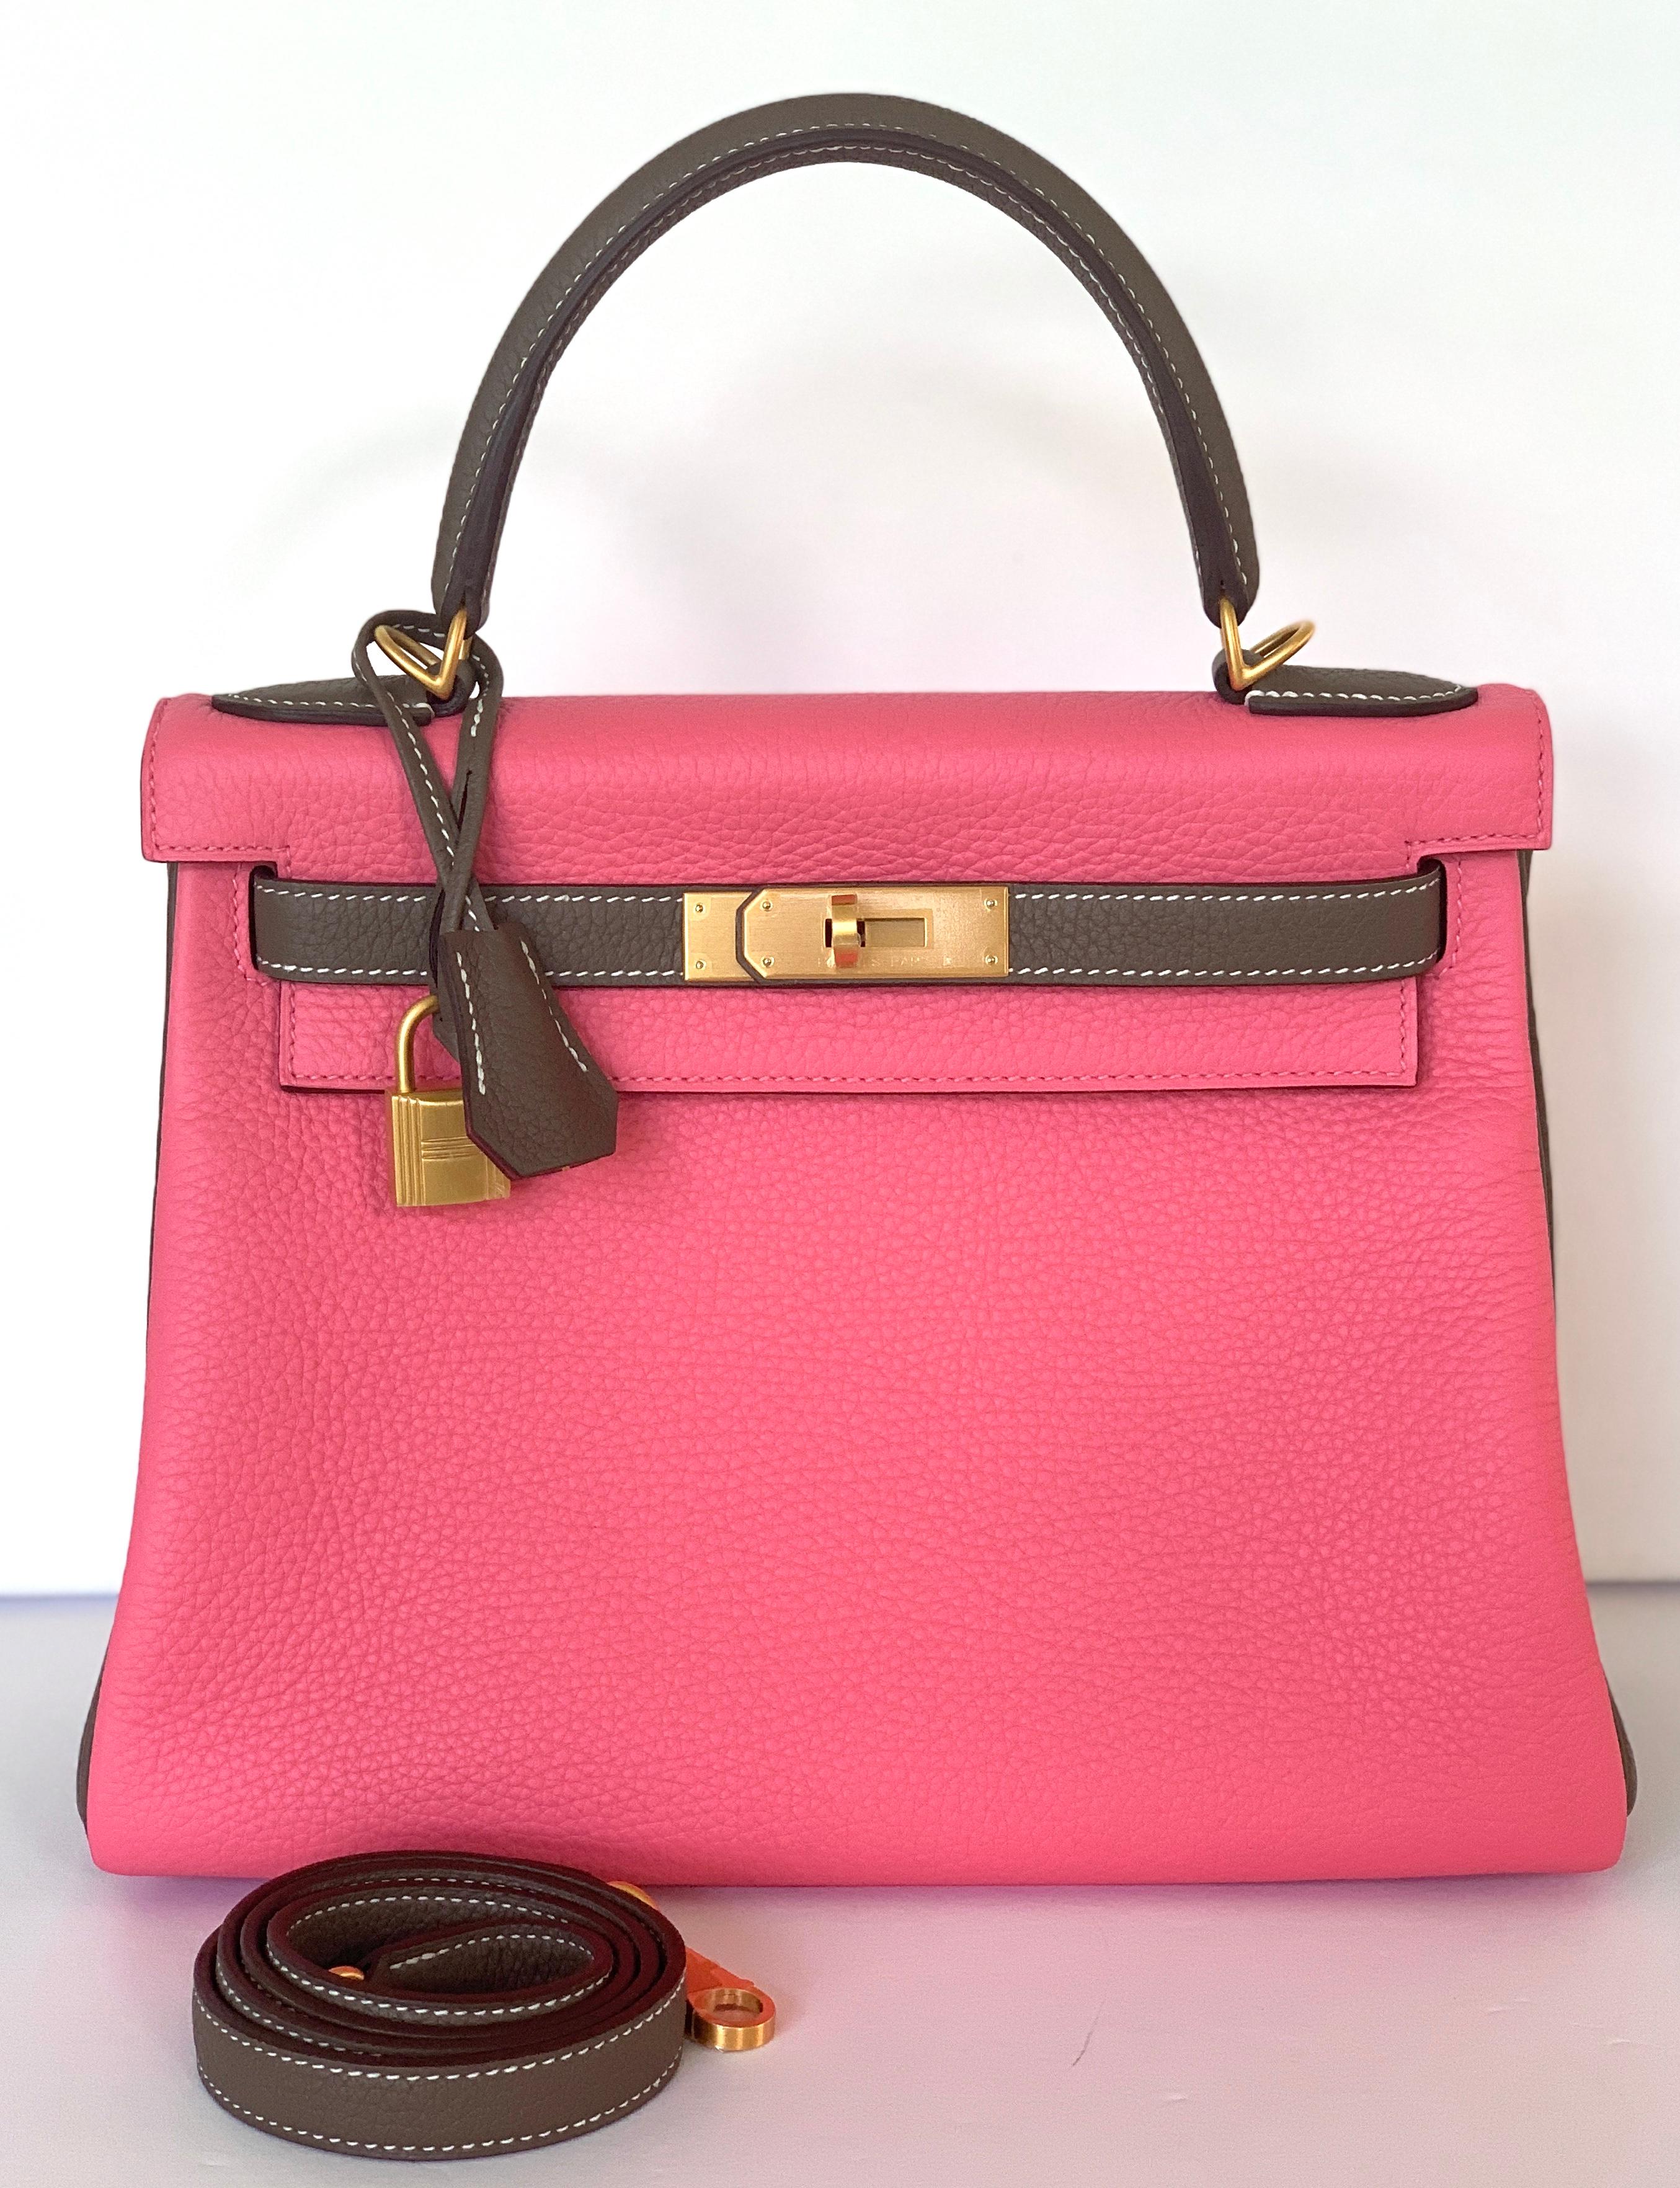 Hermes Special Order VIP Kelly Bag
28cm
Rose Azalea and Etoupe
Contrast stitching on the Etoupe
You wont find this anywhere
Specially ordered
Taurillon Clemence
Brushed Gold Hardware
A stunning combination
Pink is so in demand
Hermes Box, tissue,